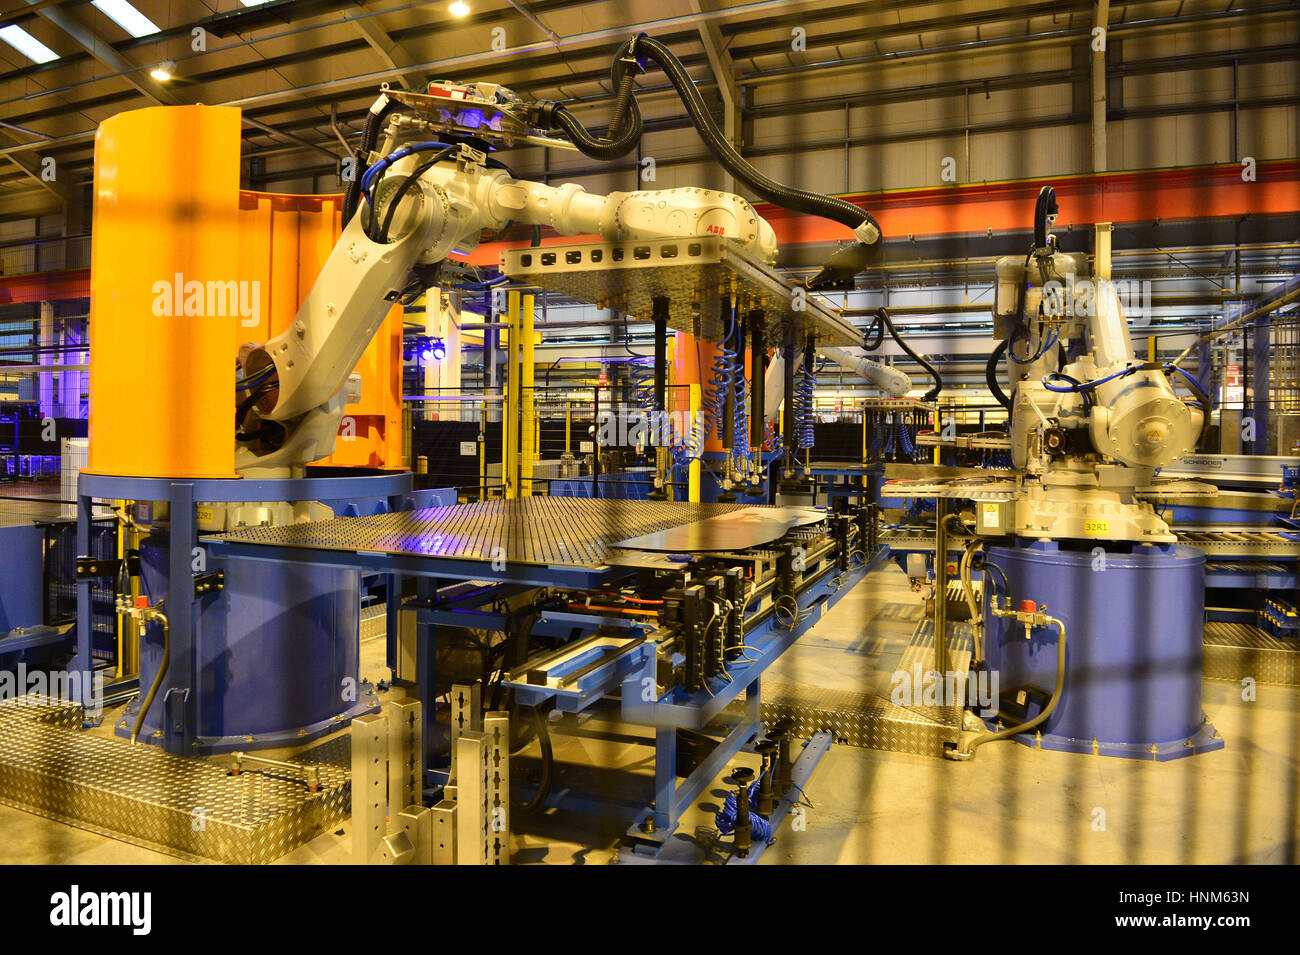 A high-tech robotic welding line is unveiled at the automotive service centre at Tata Steel's Wednesbury site in Willenhall, Wolverhampton. Stock Photo